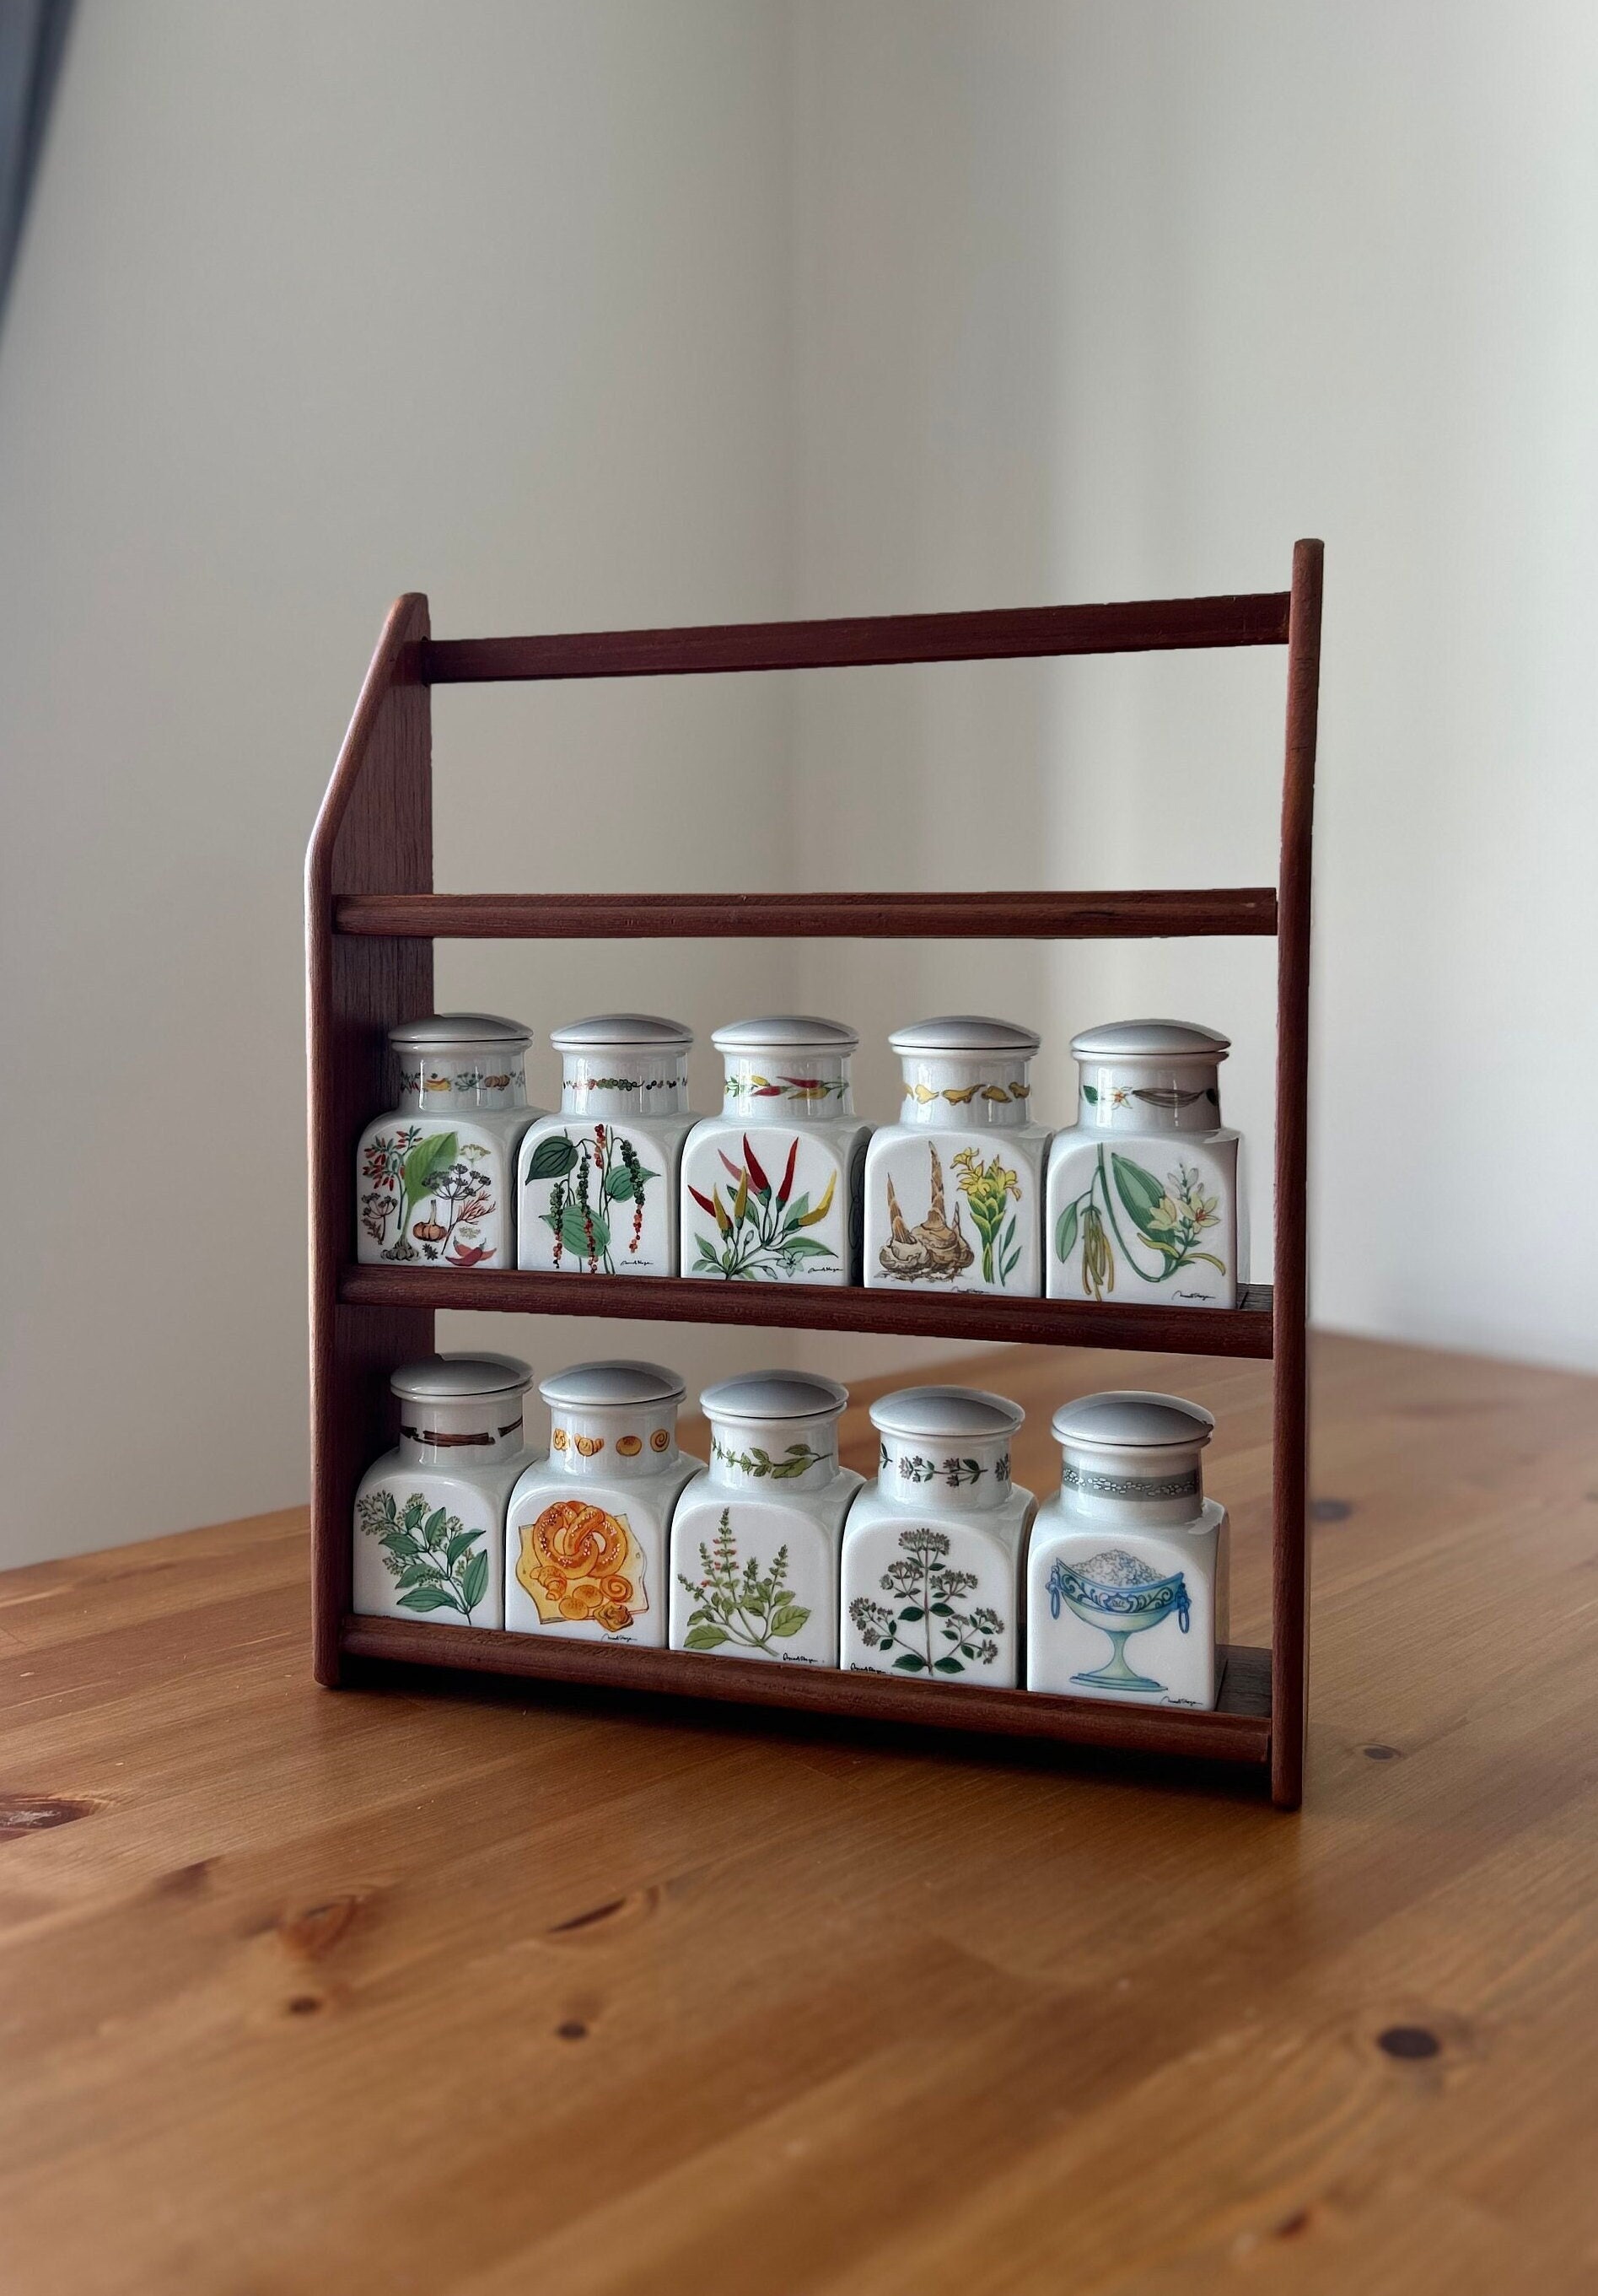 Mid 20th Century Goodwood Spice Rack With Jars and Lazy Susan